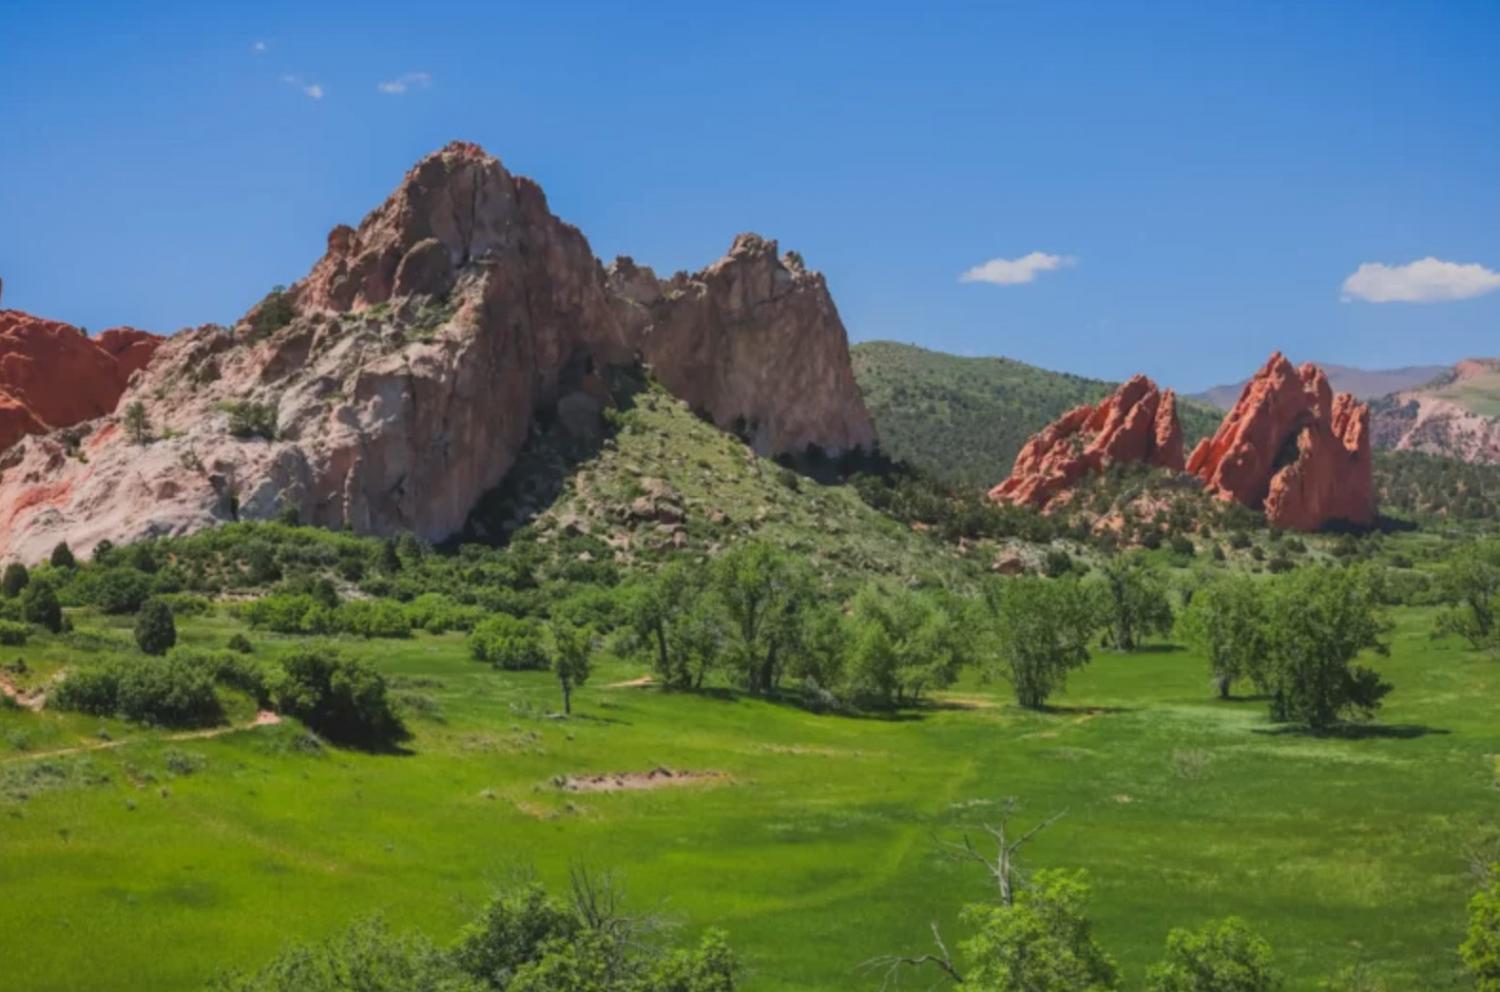 Halloween Hike in Garden of the Gods
Mon Oct 31, 4:00 PM - Mon Oct 31, 6:00 PM
in 11 days